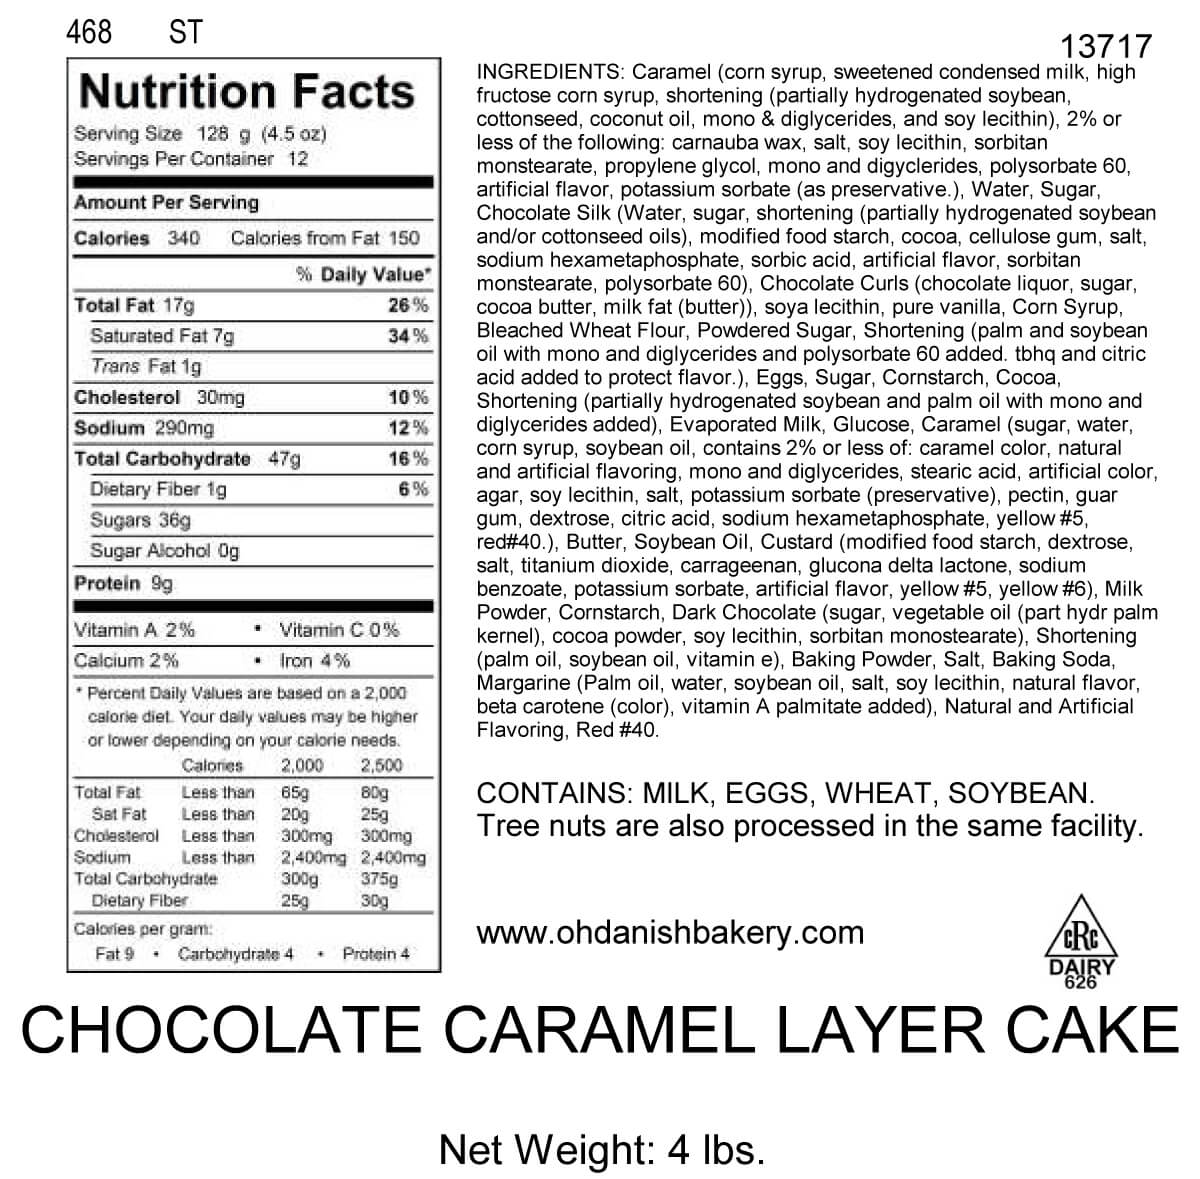 Nutritional Label for Chocolate Caramel Layer Cake